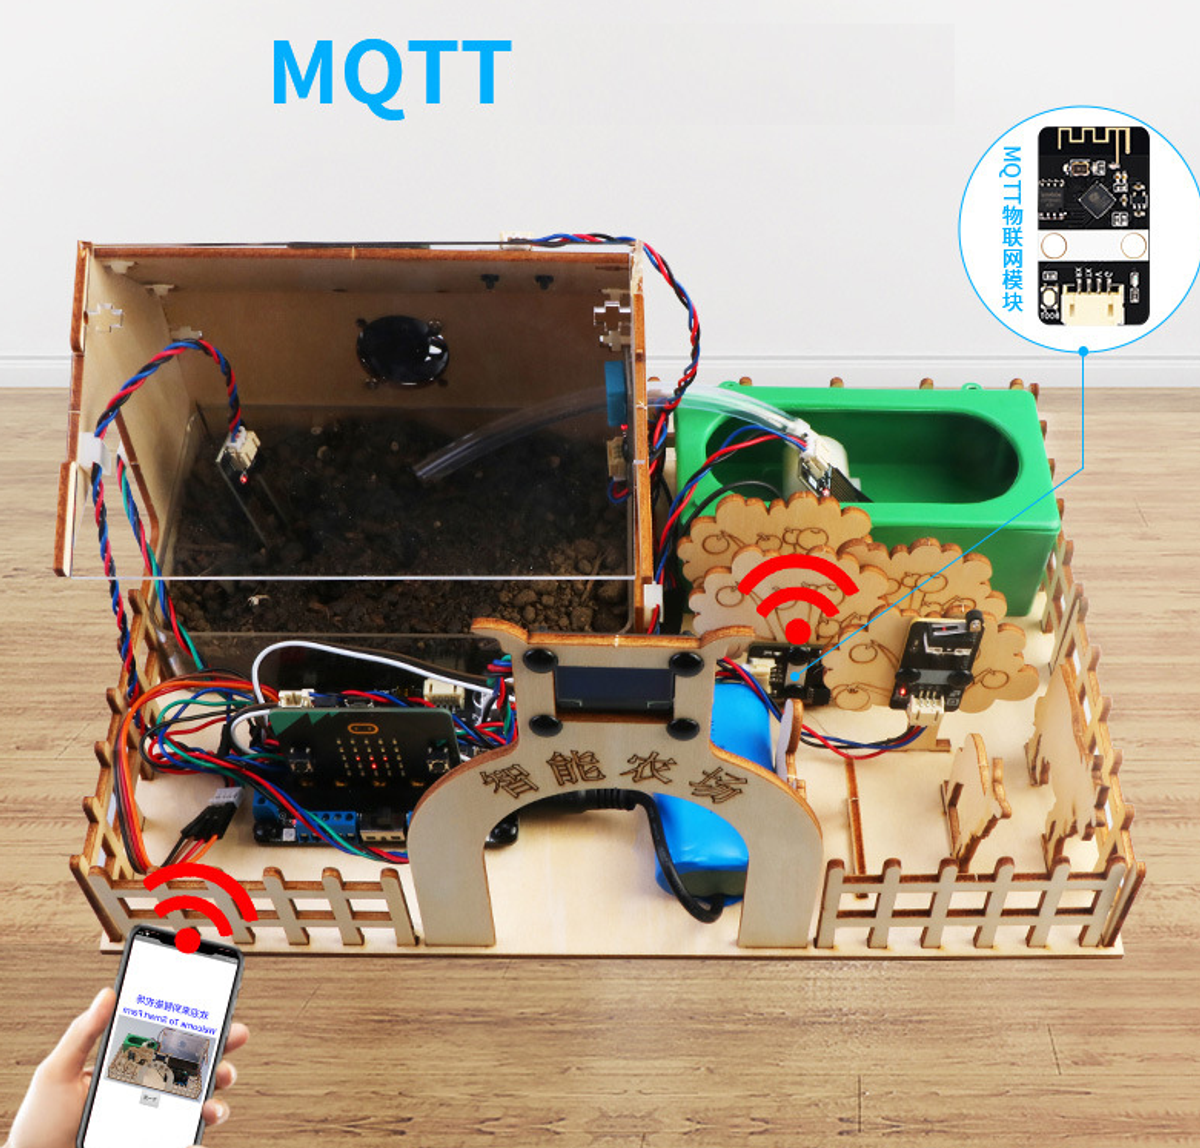 Arduino-based smart farm control learning package maker STEAM education smart home appliances Qhebot